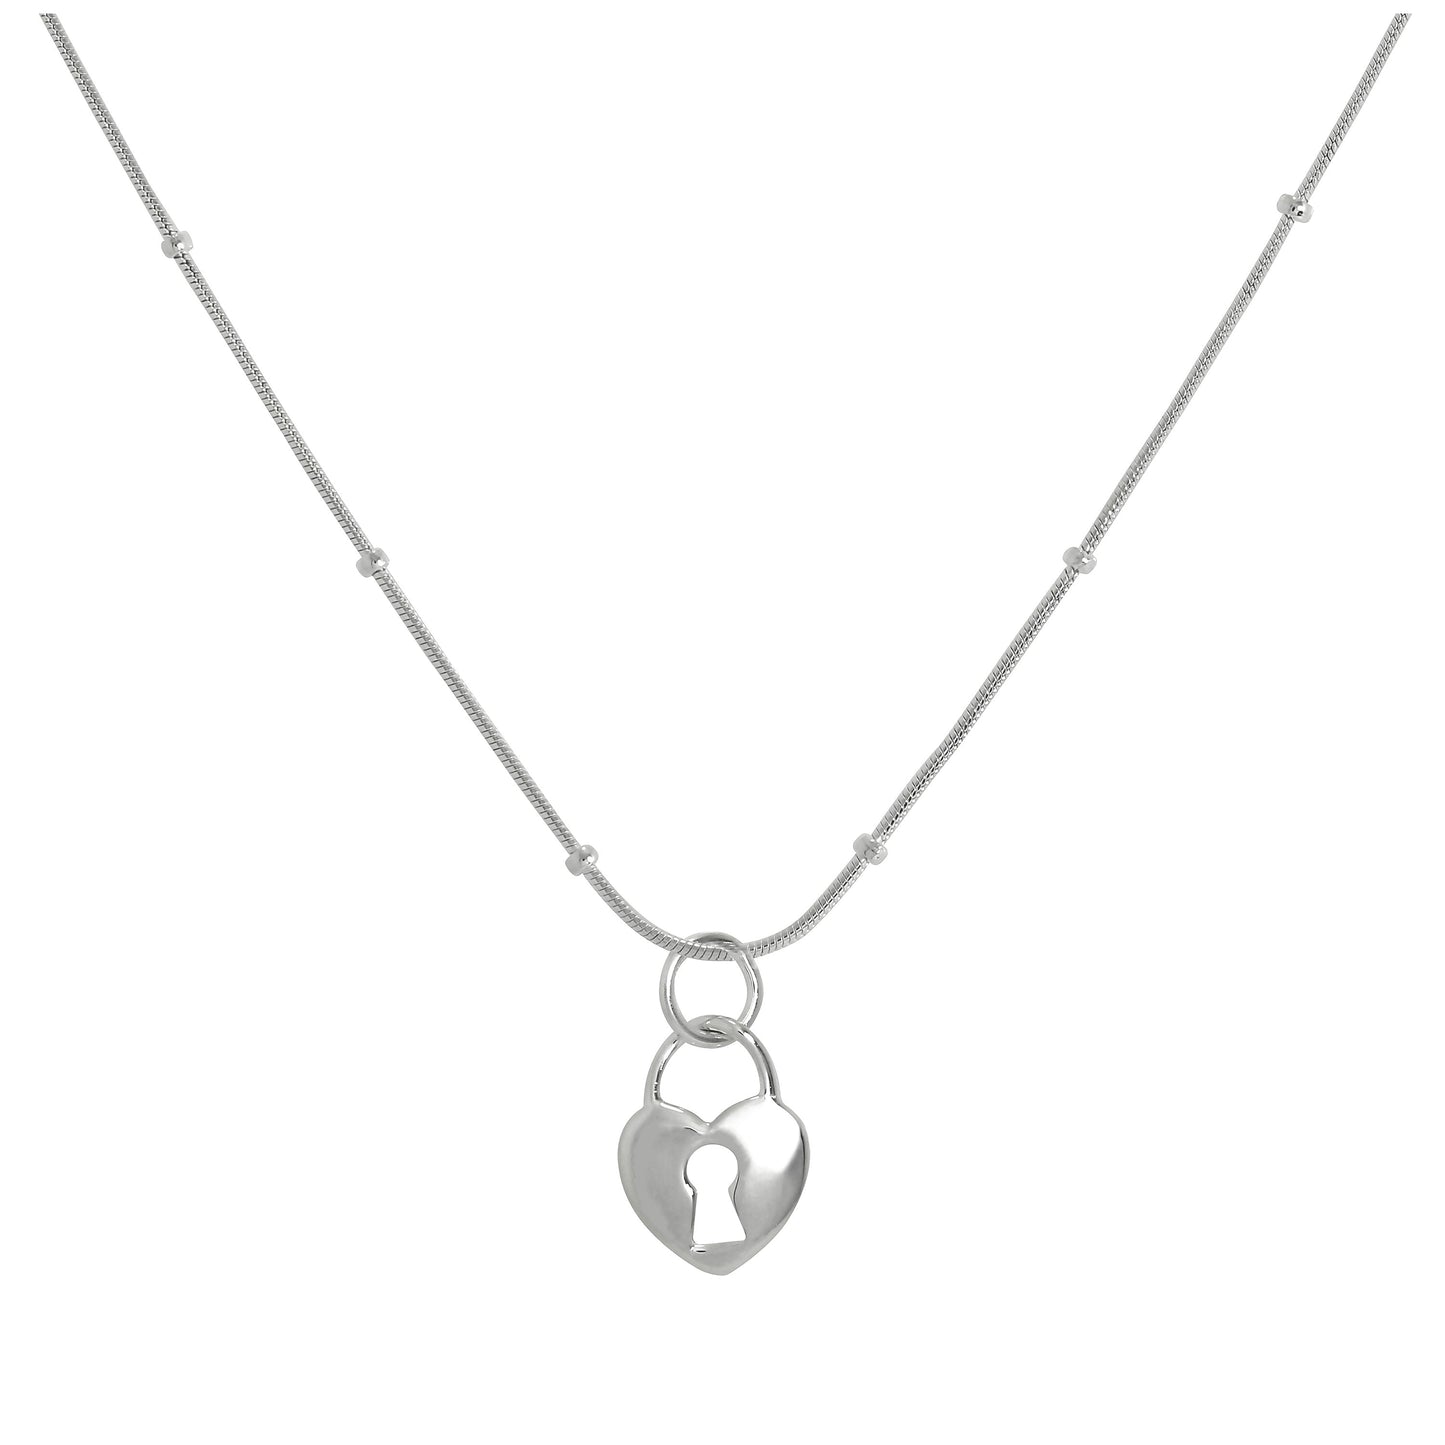 Sterling Silver Heart Padlock Pendant Necklace 16 - 22 Inches